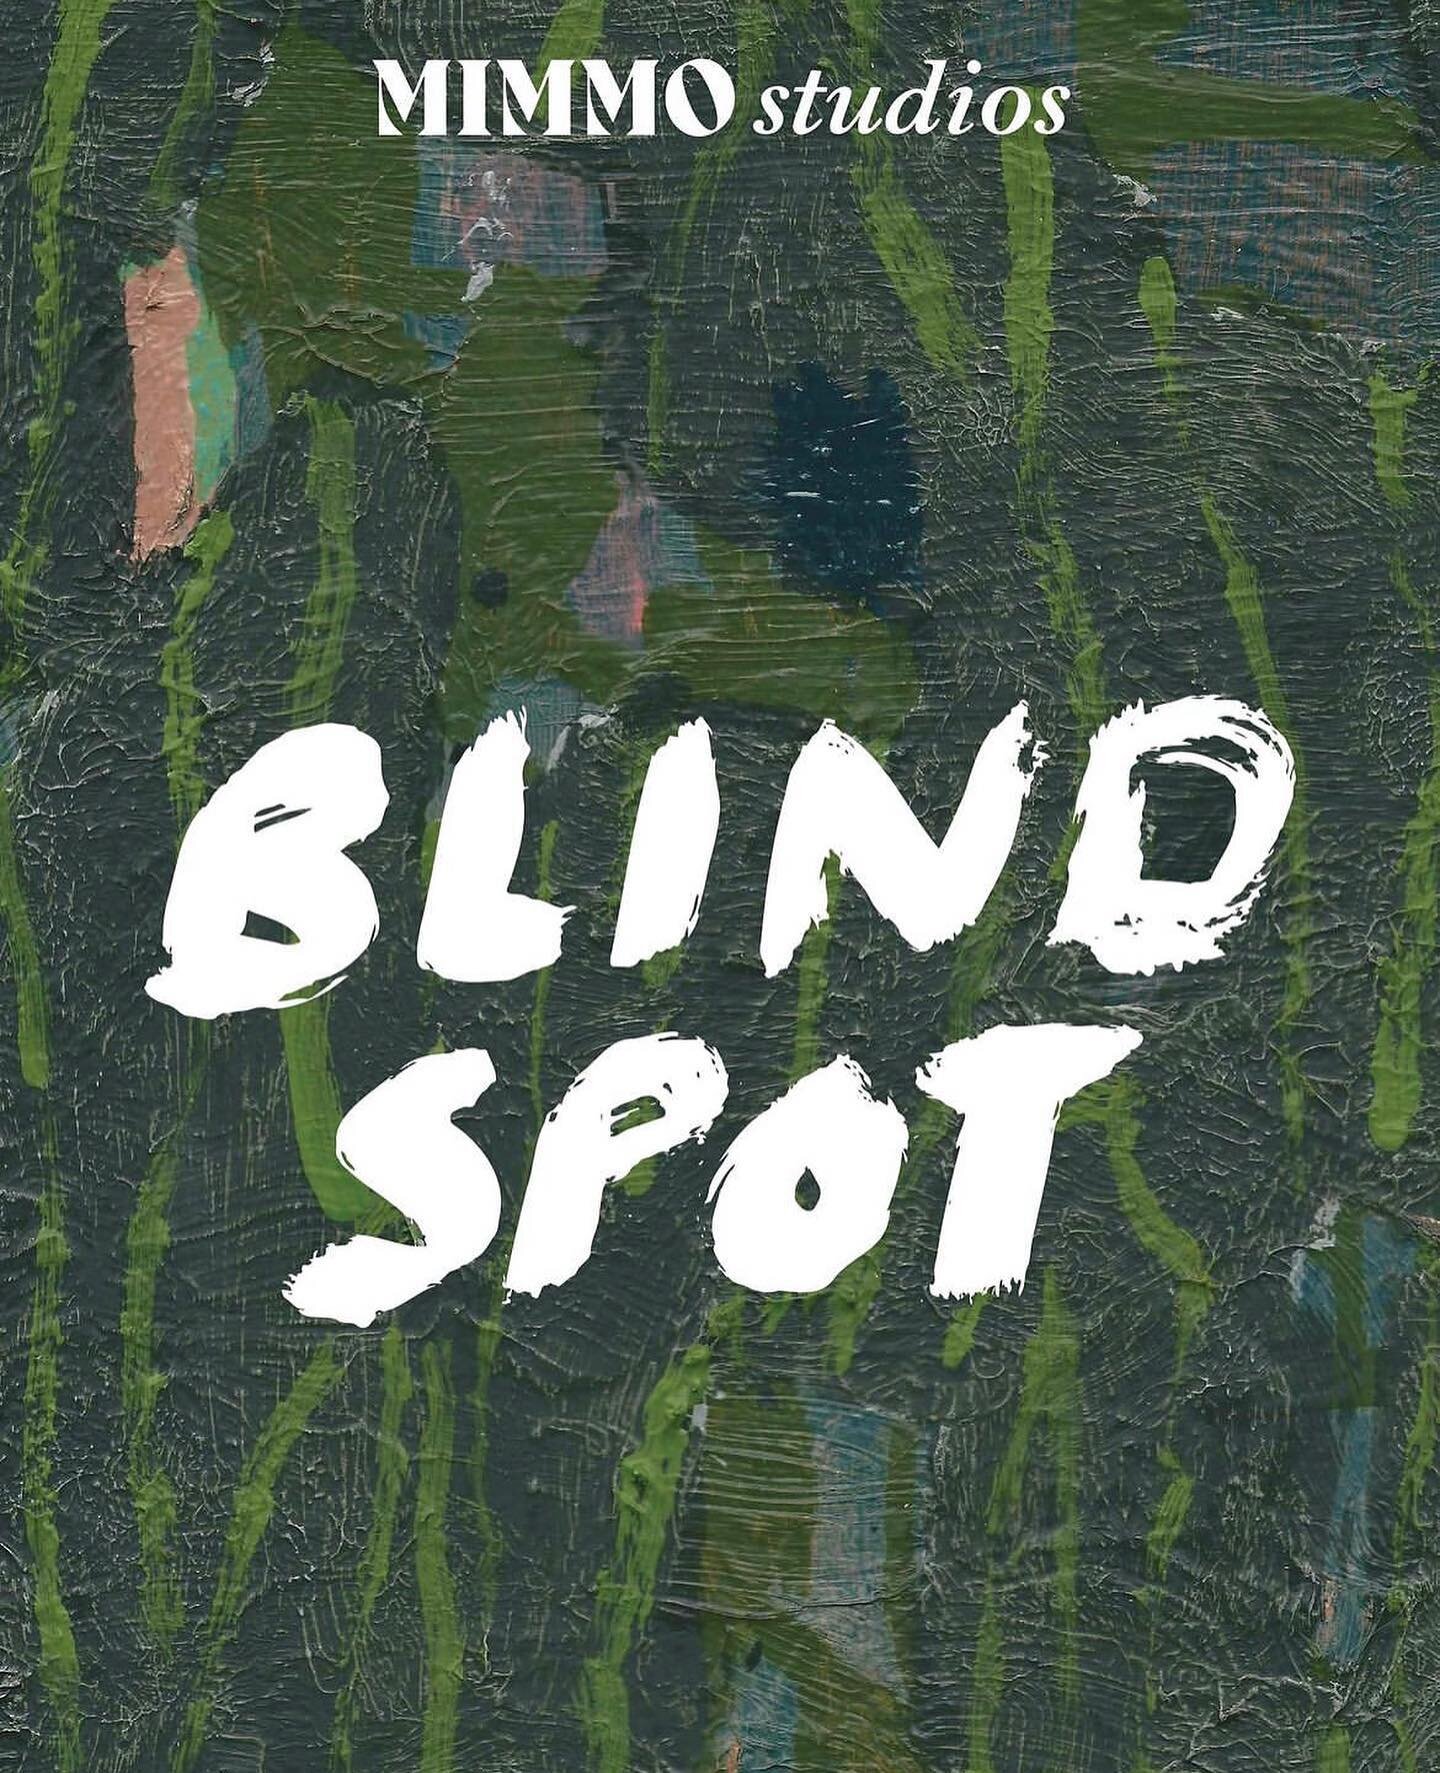 Our @jackpaffett is opening a solo exhibition this week at @mimmostudios in Cheltenham.

&lsquo;Blind Spot' opens on the 8th September and runs through to the 16th October.
Book your place for the opening night on the 8th through the link in Jacks bi